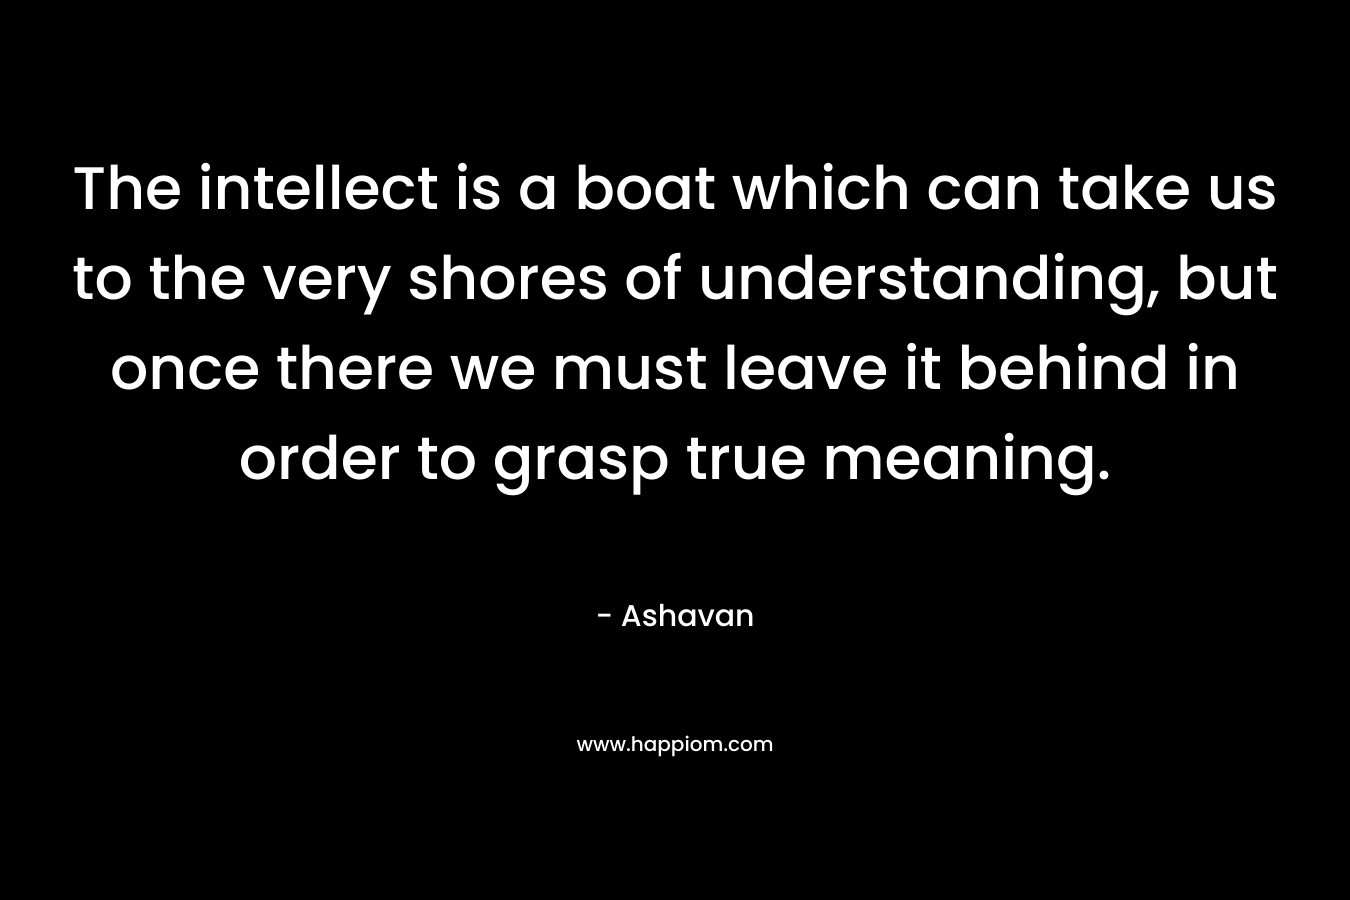 The intellect is a boat which can take us to the very shores of understanding, but once there we must leave it behind in order to grasp true meaning.